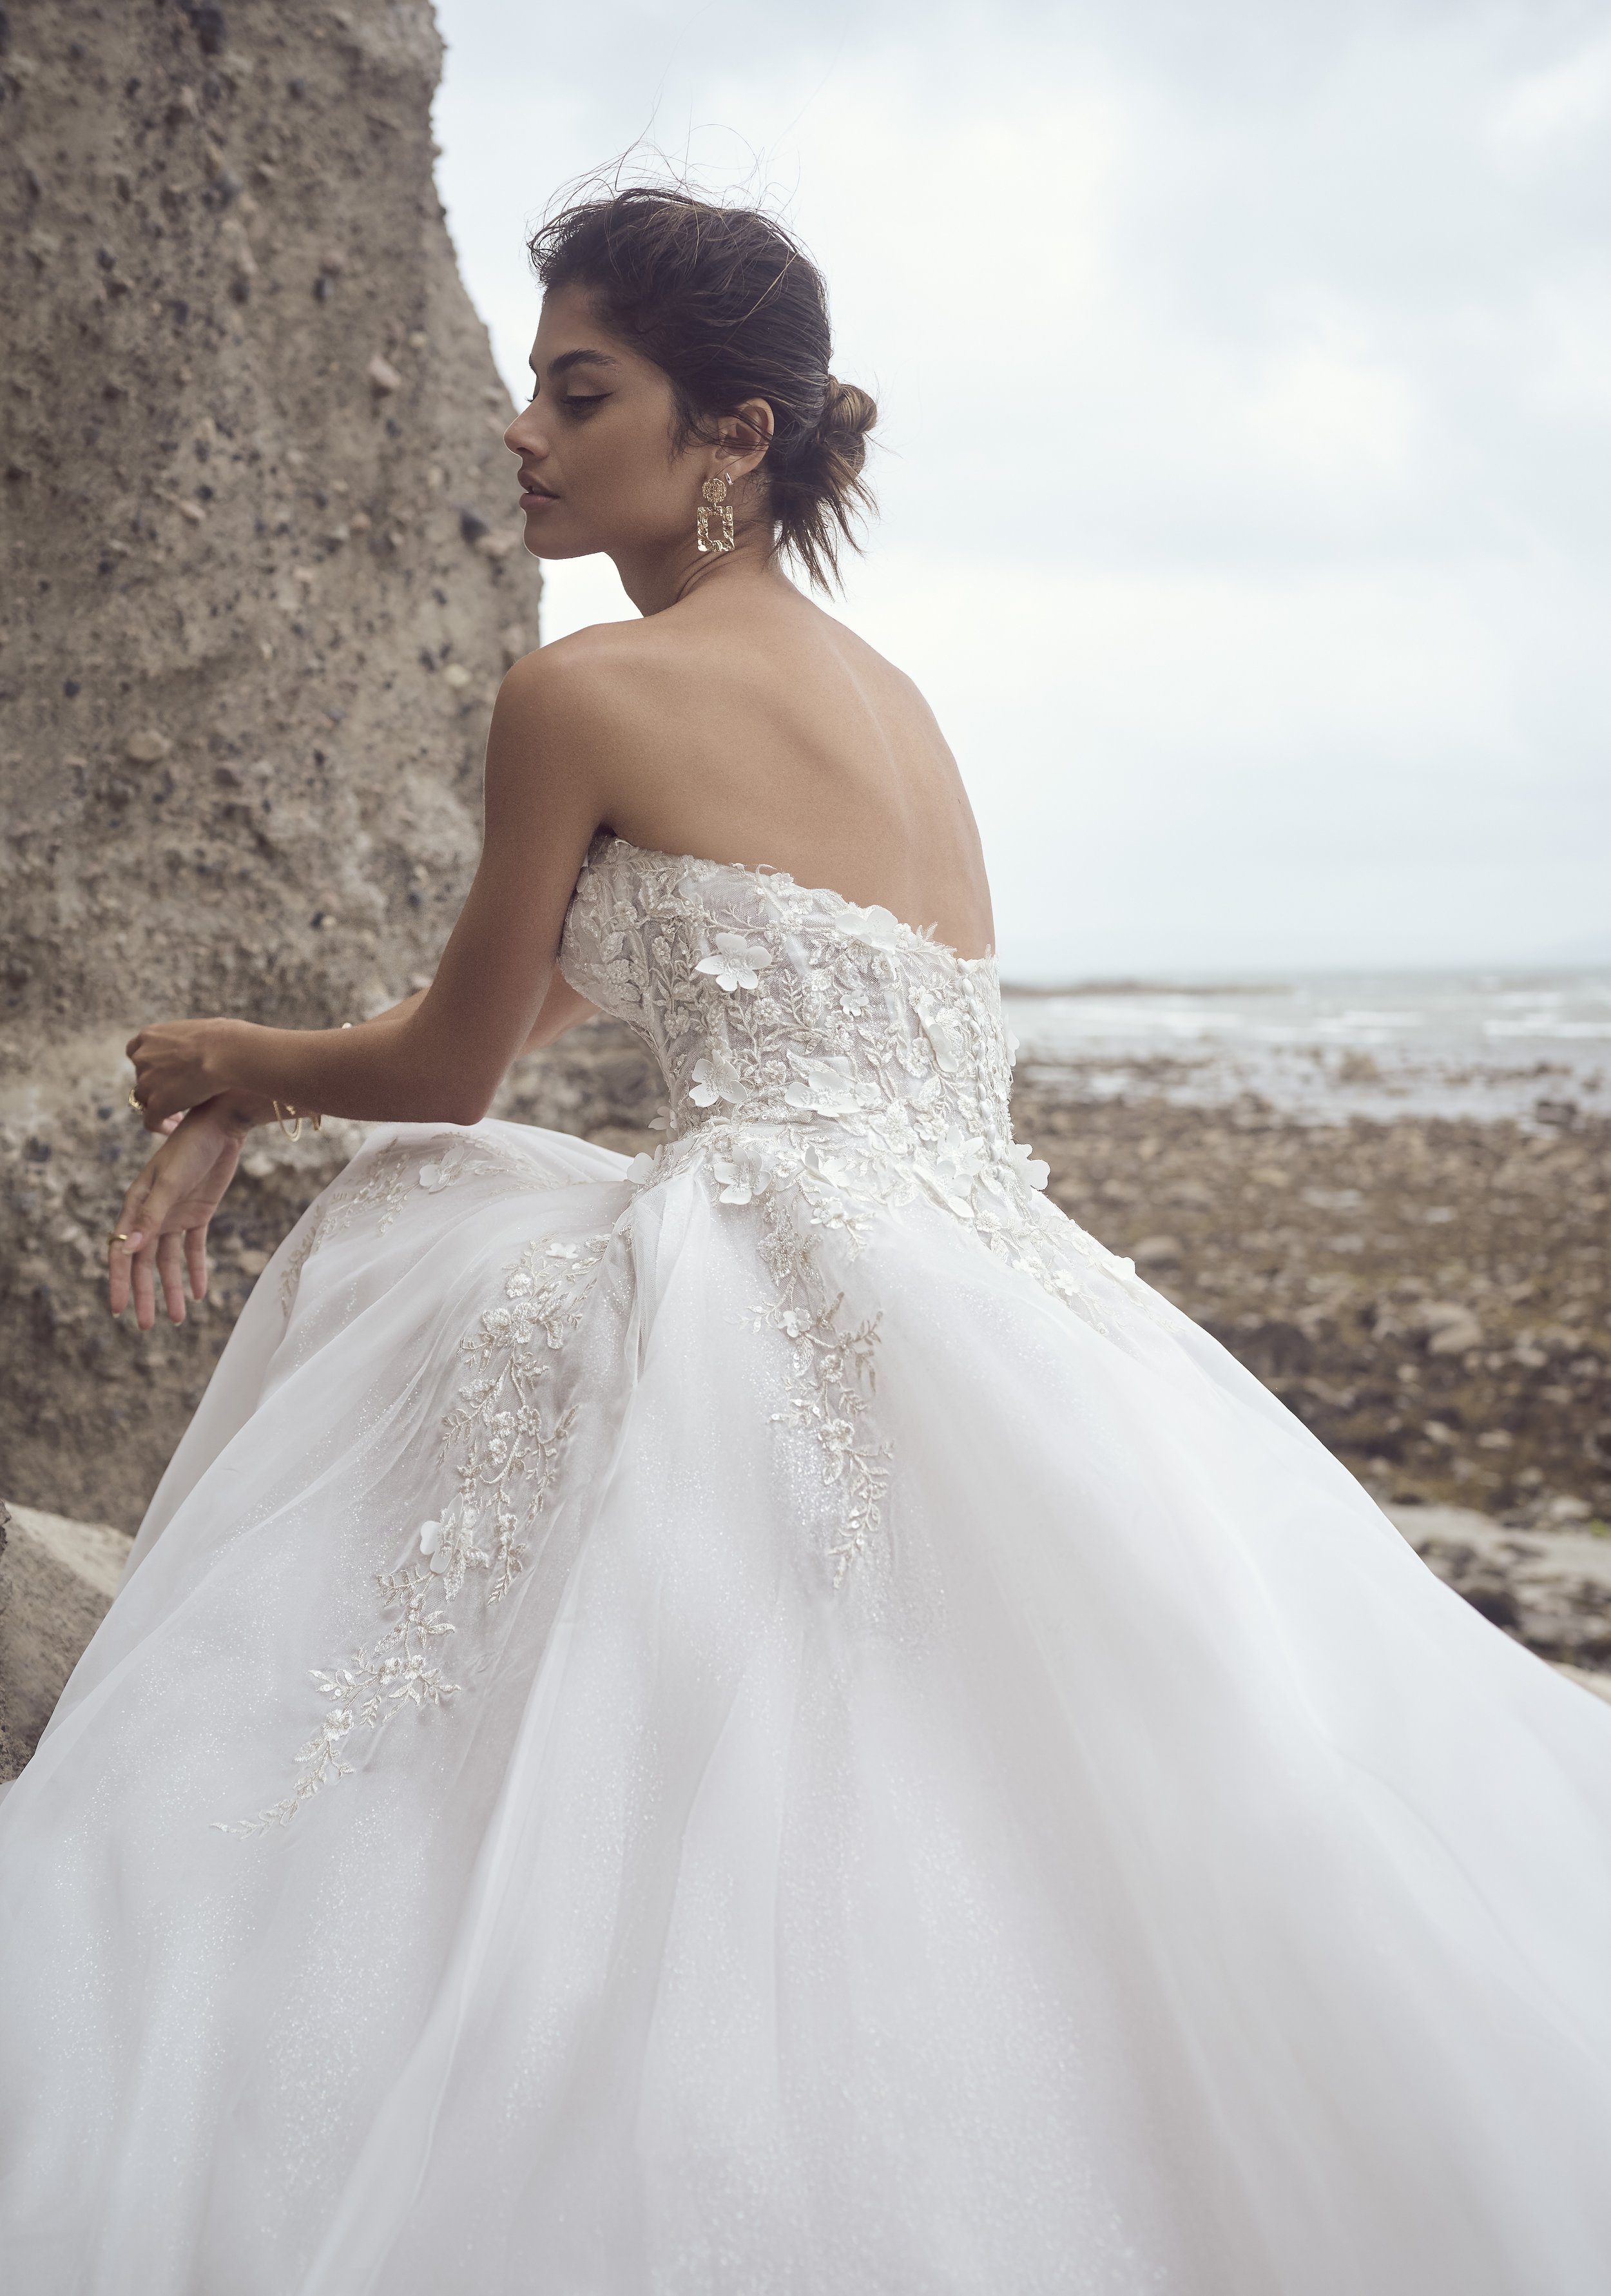 Beautiful Back Wedding Dresses Which One Is Right For You?